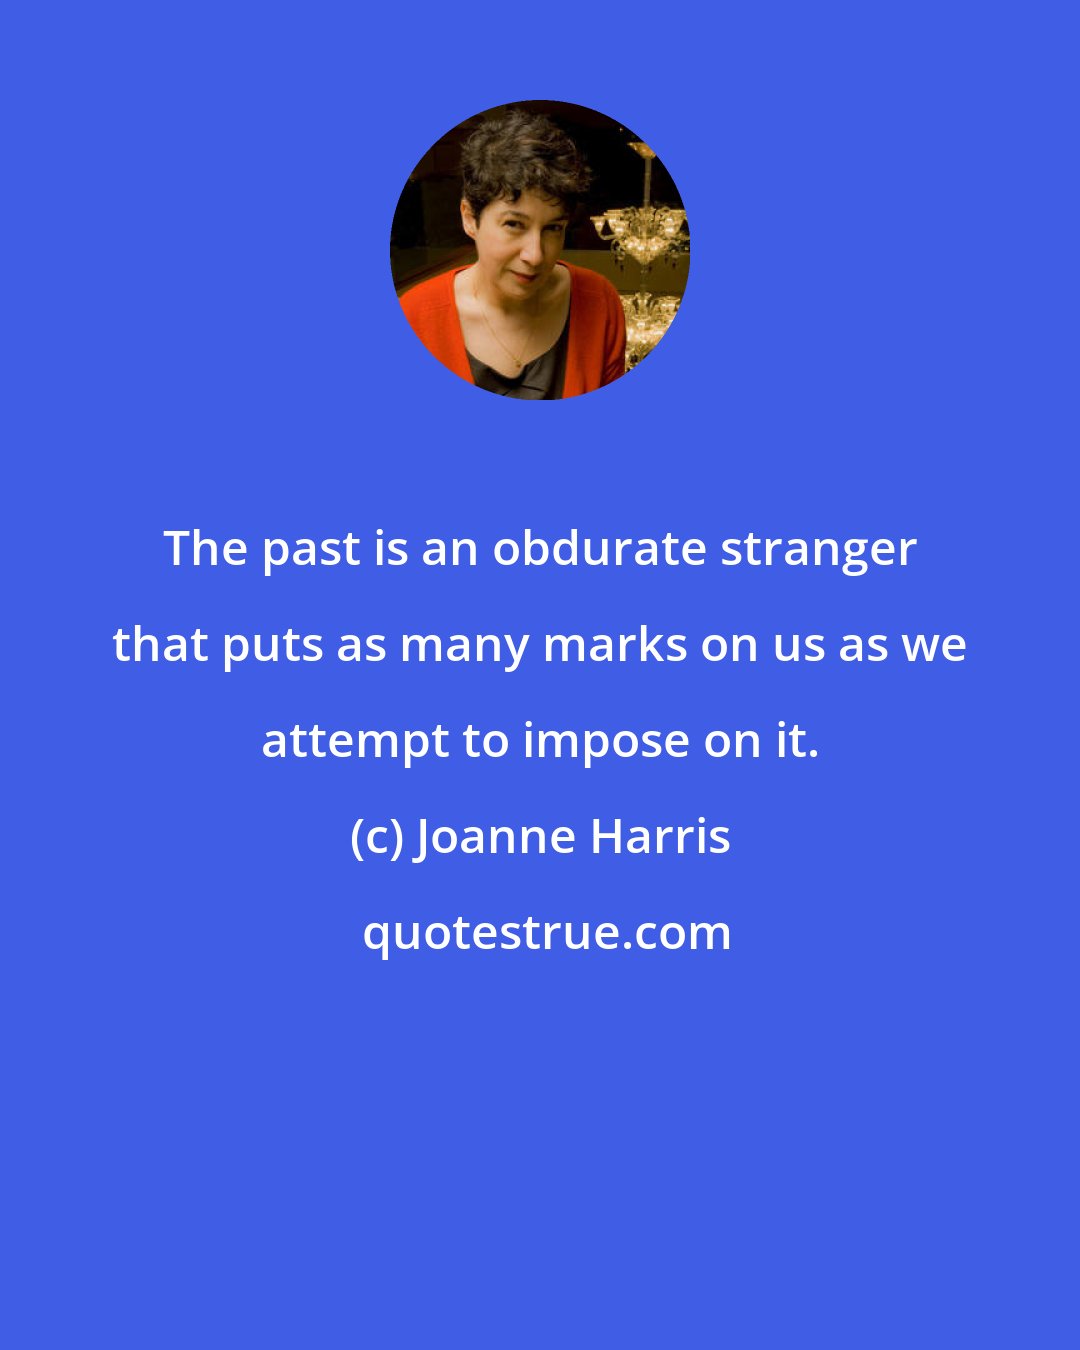 Joanne Harris: The past is an obdurate stranger that puts as many marks on us as we attempt to impose on it.